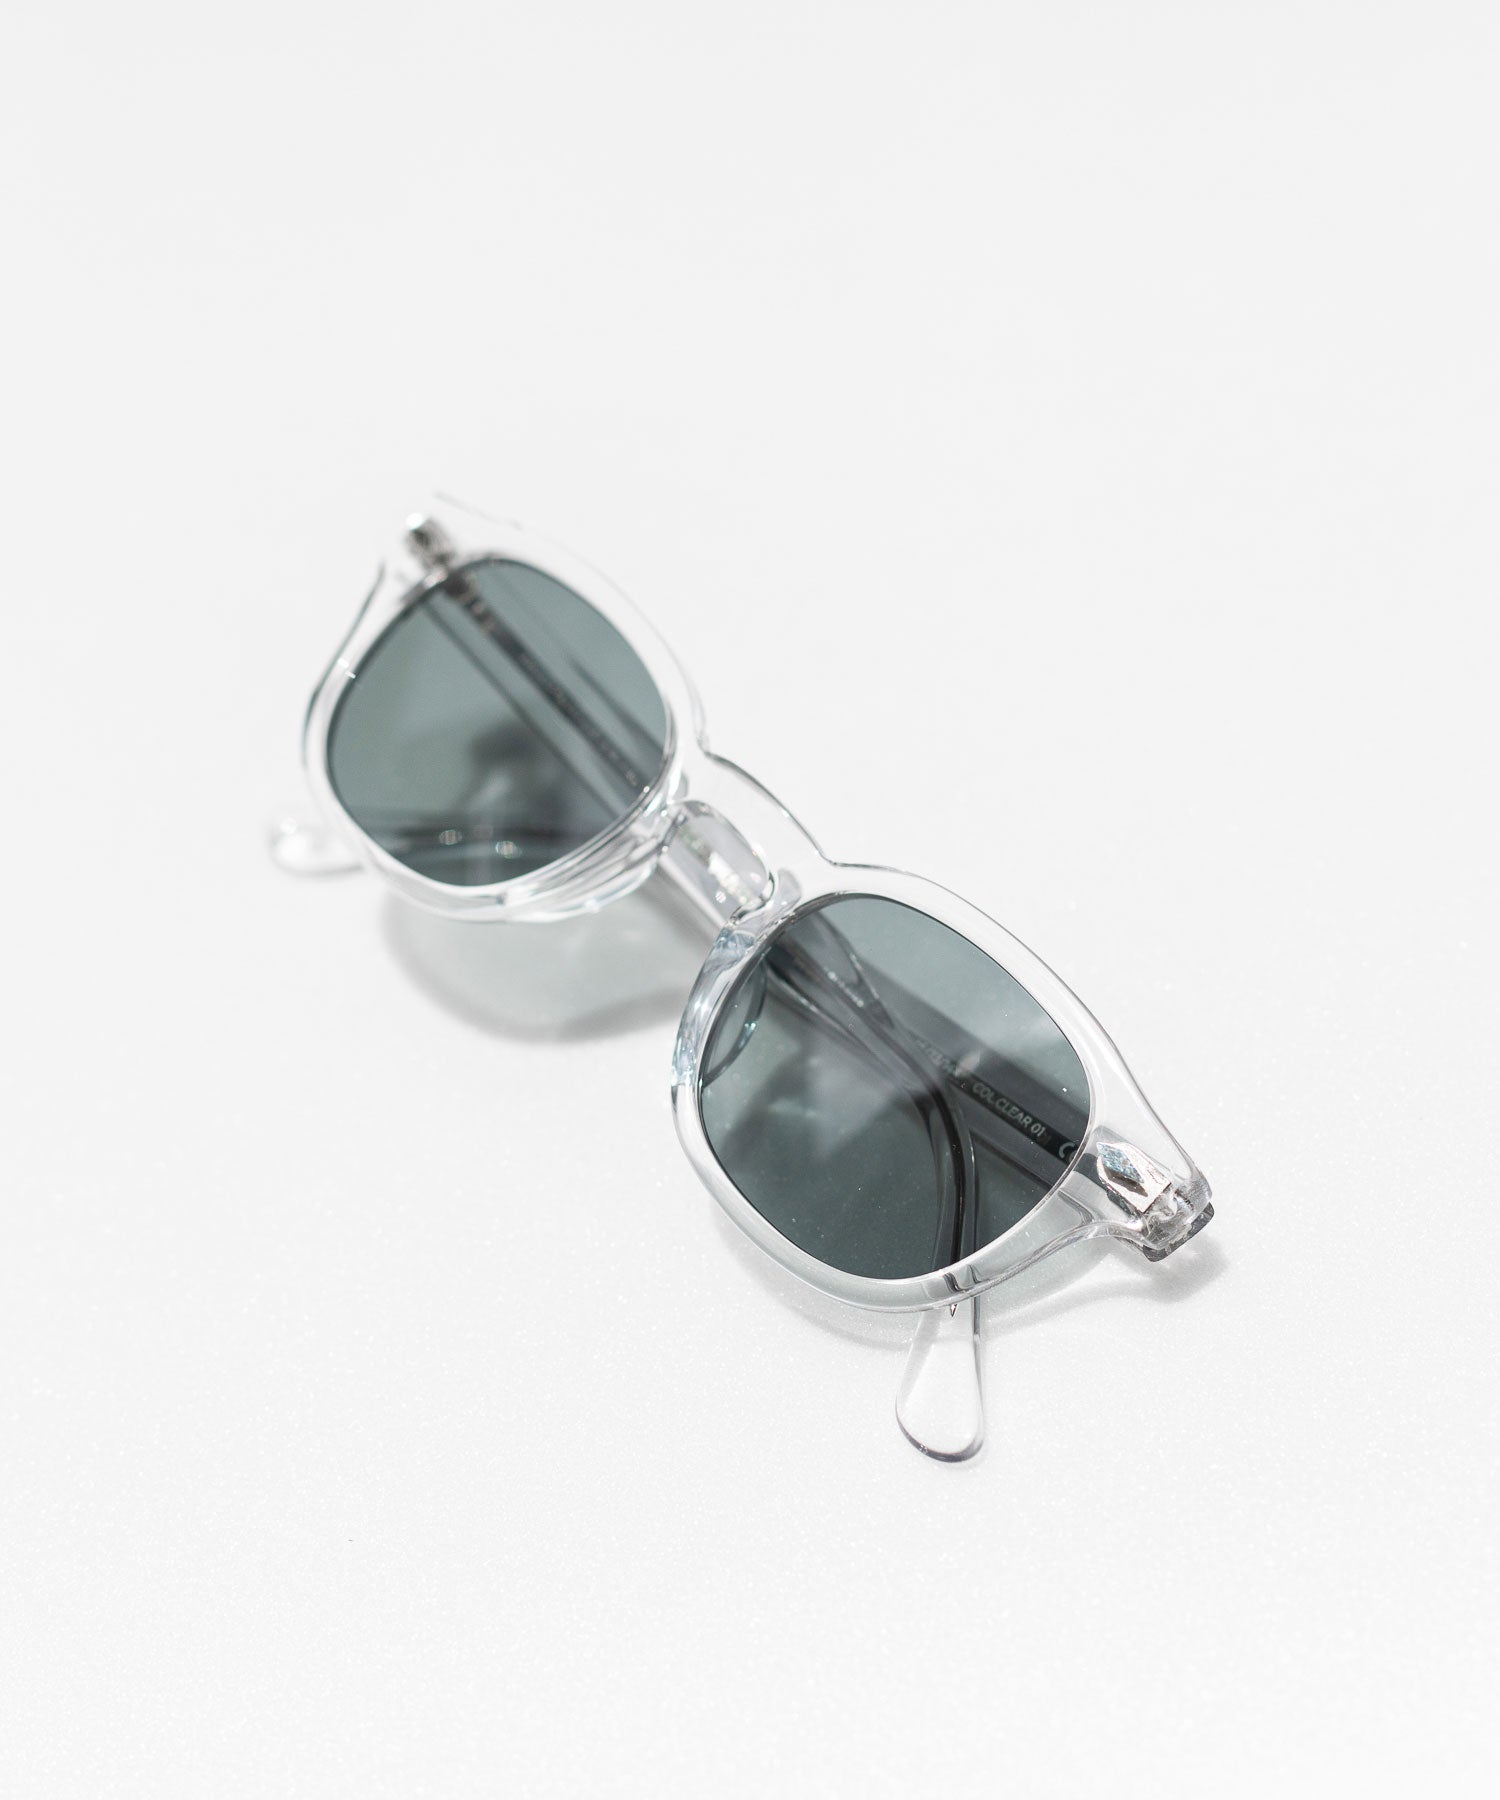 【NOCHINO OPTICAL】- LIMITED - NOCHINO - CRYSTAL CLEAR×GREY GREEN TO D.GREY sessionセッション福岡セレクトショップ 公式通販サイト サングラス